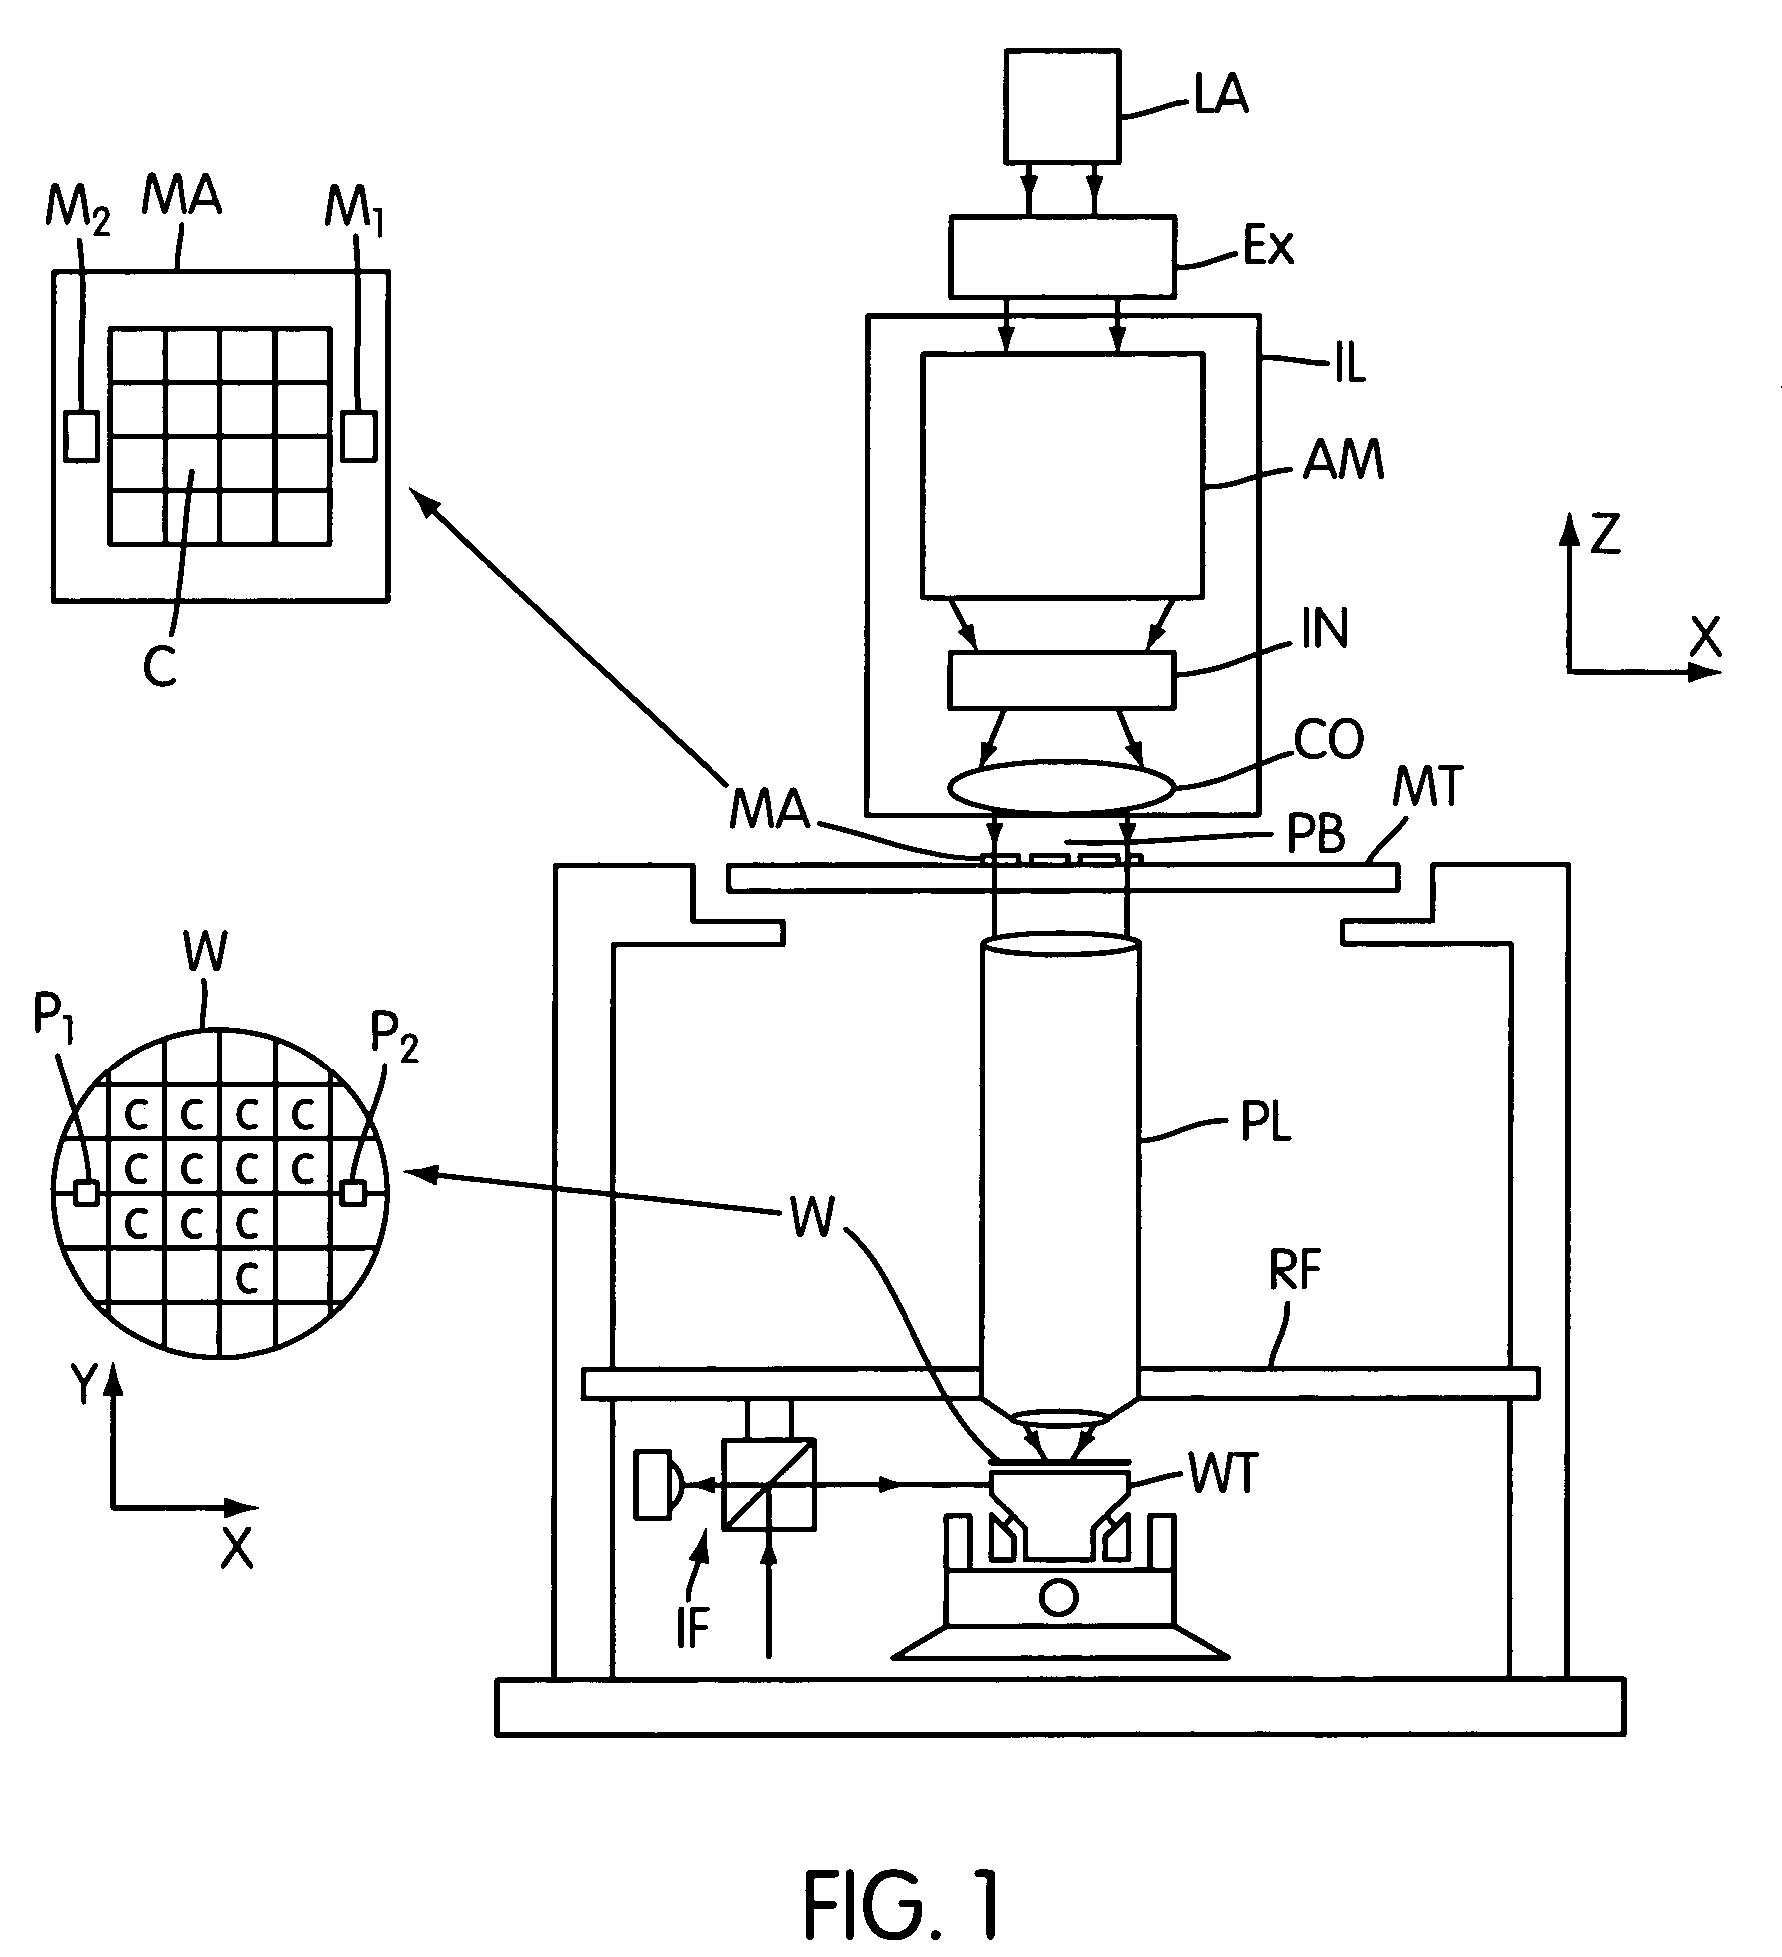 Lithographic apparatus, method of manufacturing a device, and device manufactured thereby